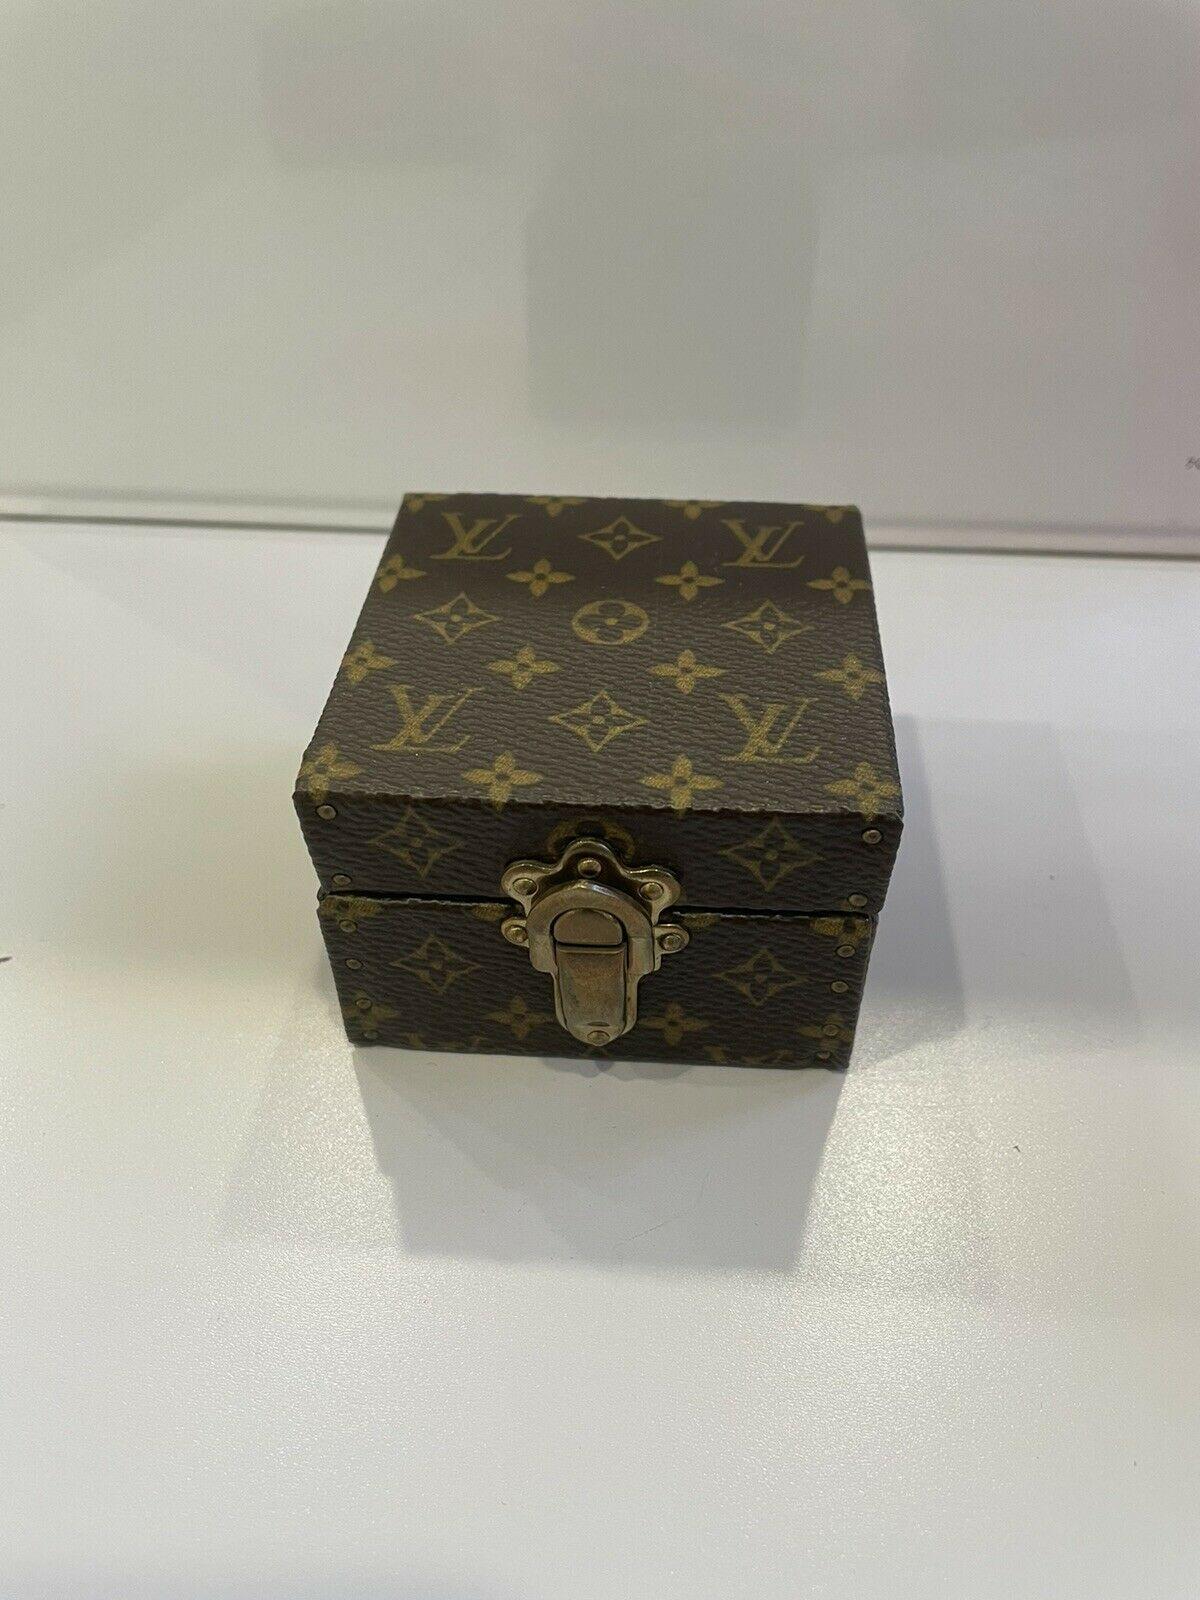 Authentic Louis Vuitton LV Logo Monogram Jewelry Case box & Outer Box

For sale is a Louis Vuitton LV Logo jewelry box.
The box includes the outer box may show some signs of wear on the outer box only. 
The case is in very good condition! 
Perfect